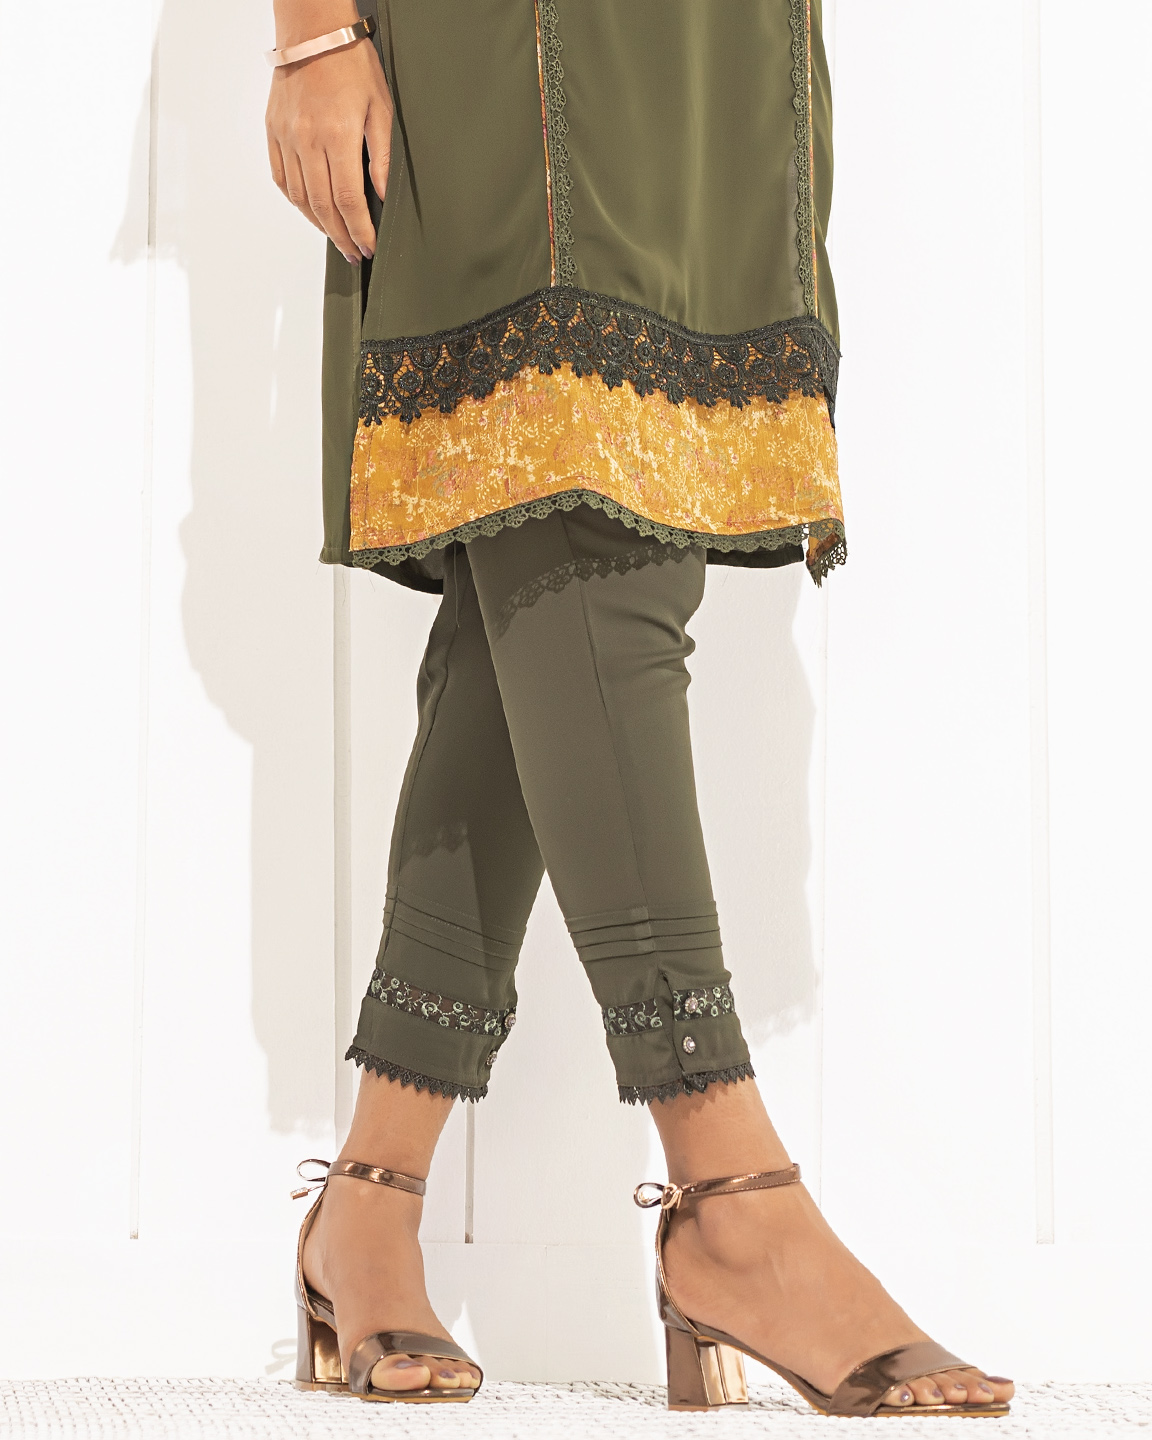 Female Ankle Length Narrow Hem Pant With Lace Details | Olive Green |  Texmart